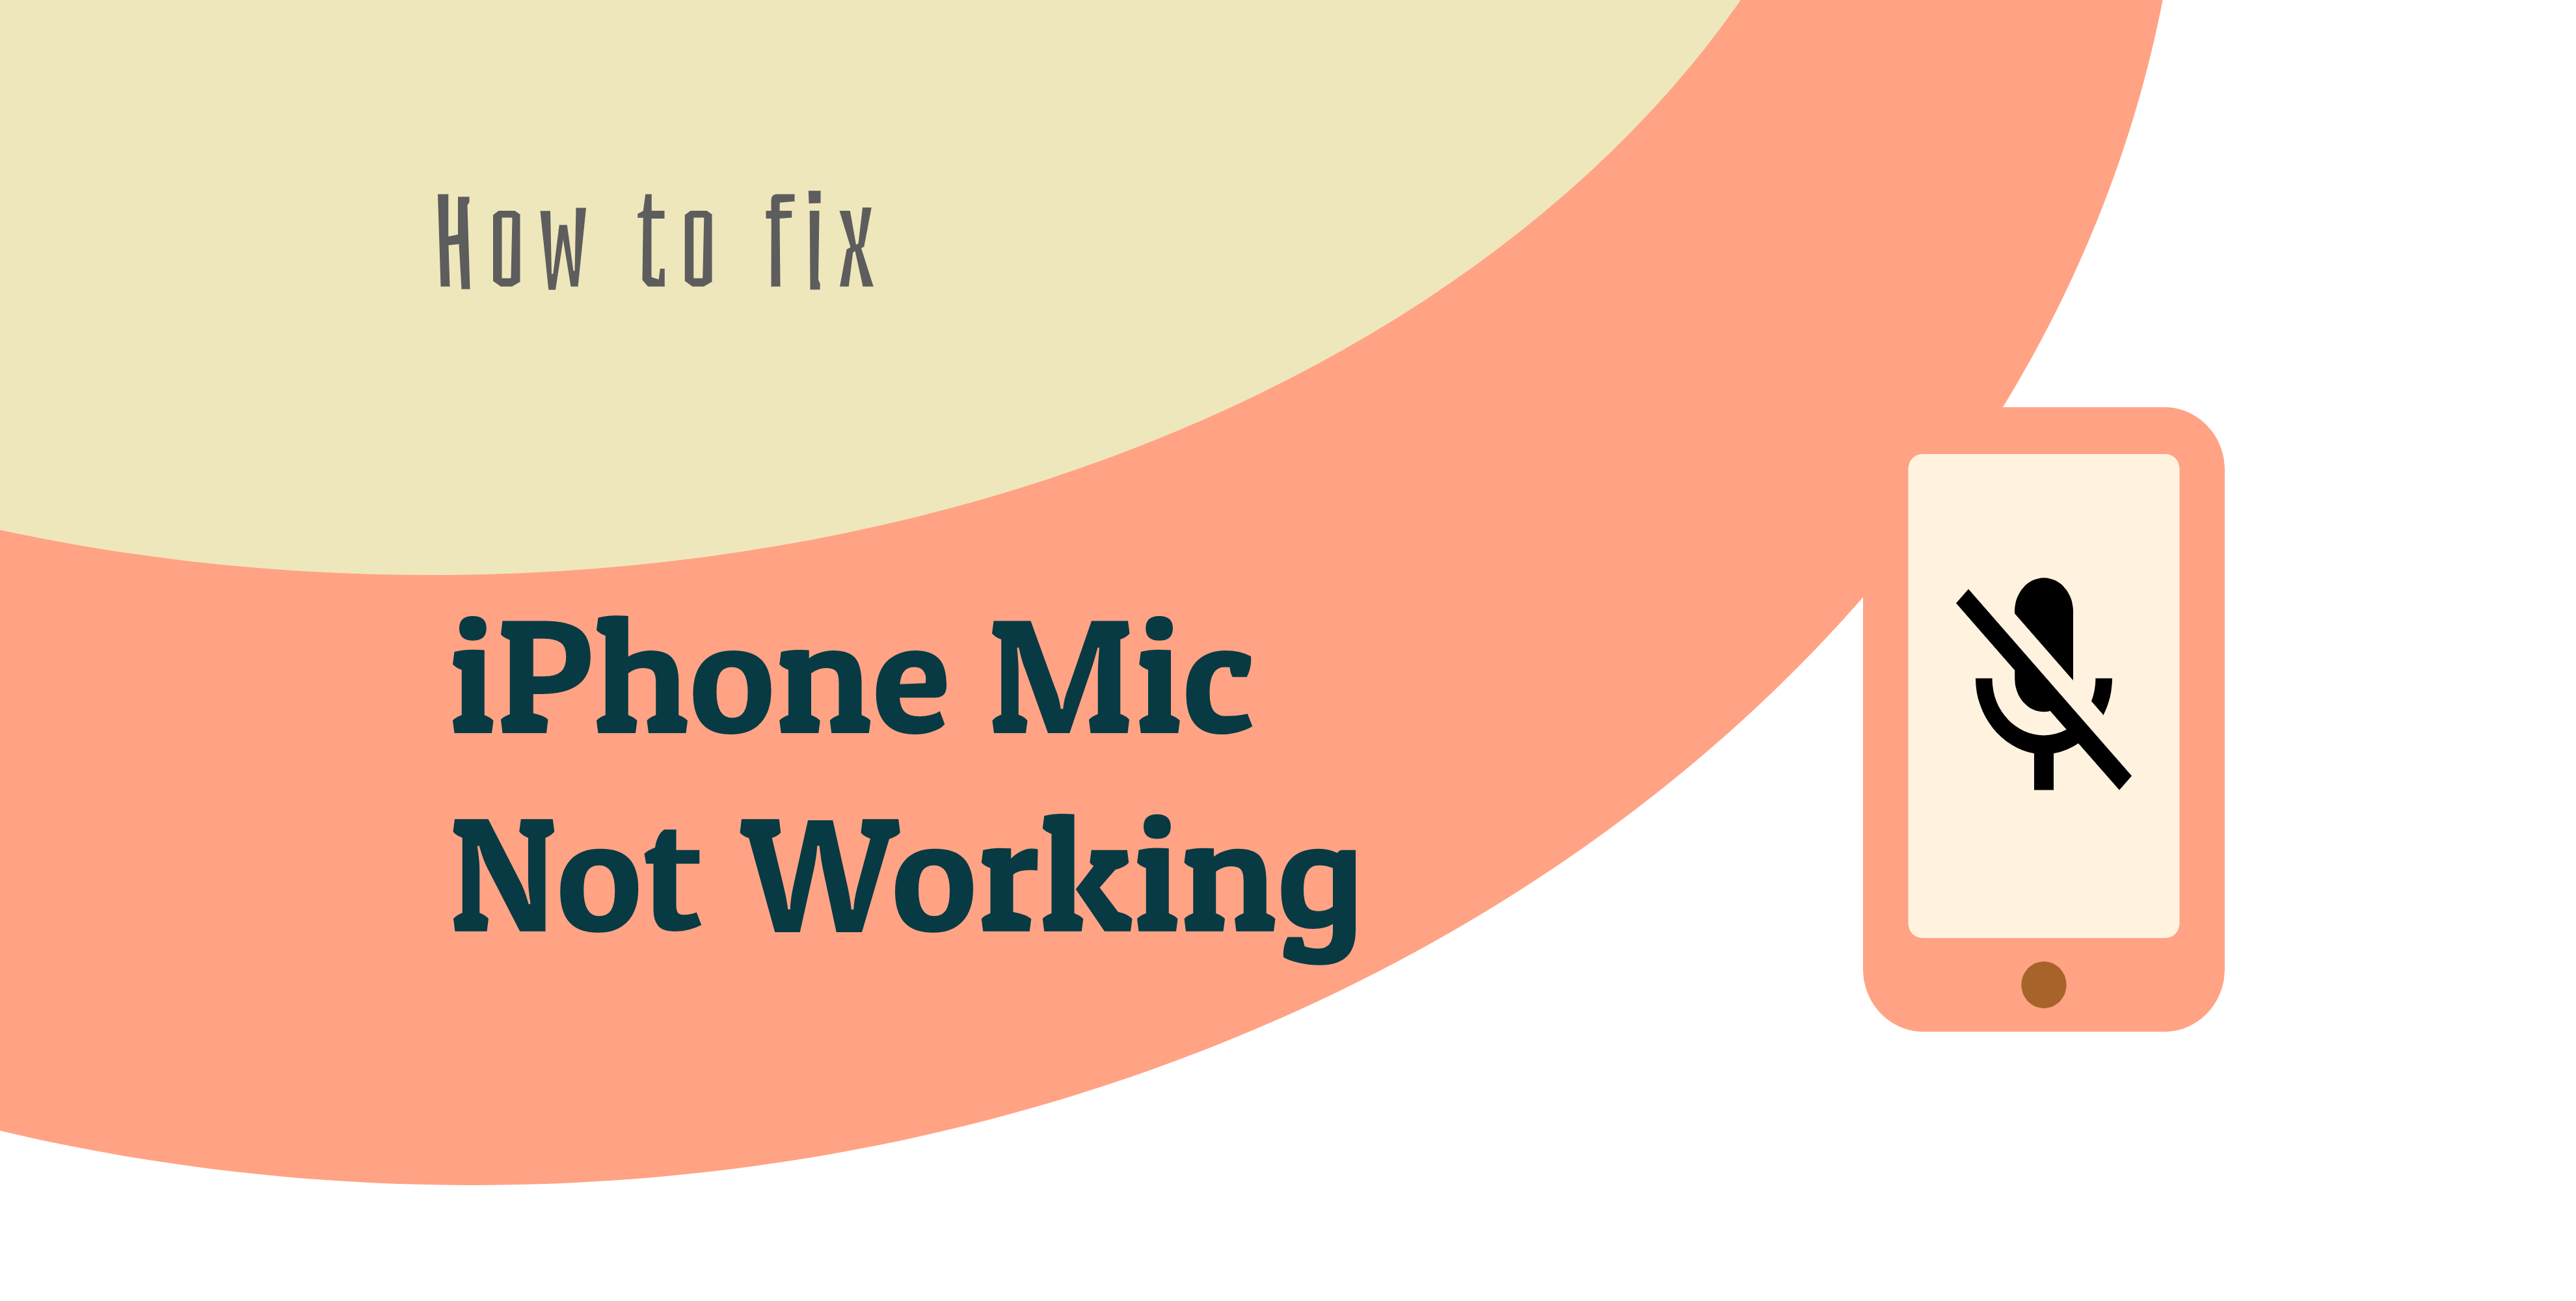 iPhone Mic not working? Here's the fix!